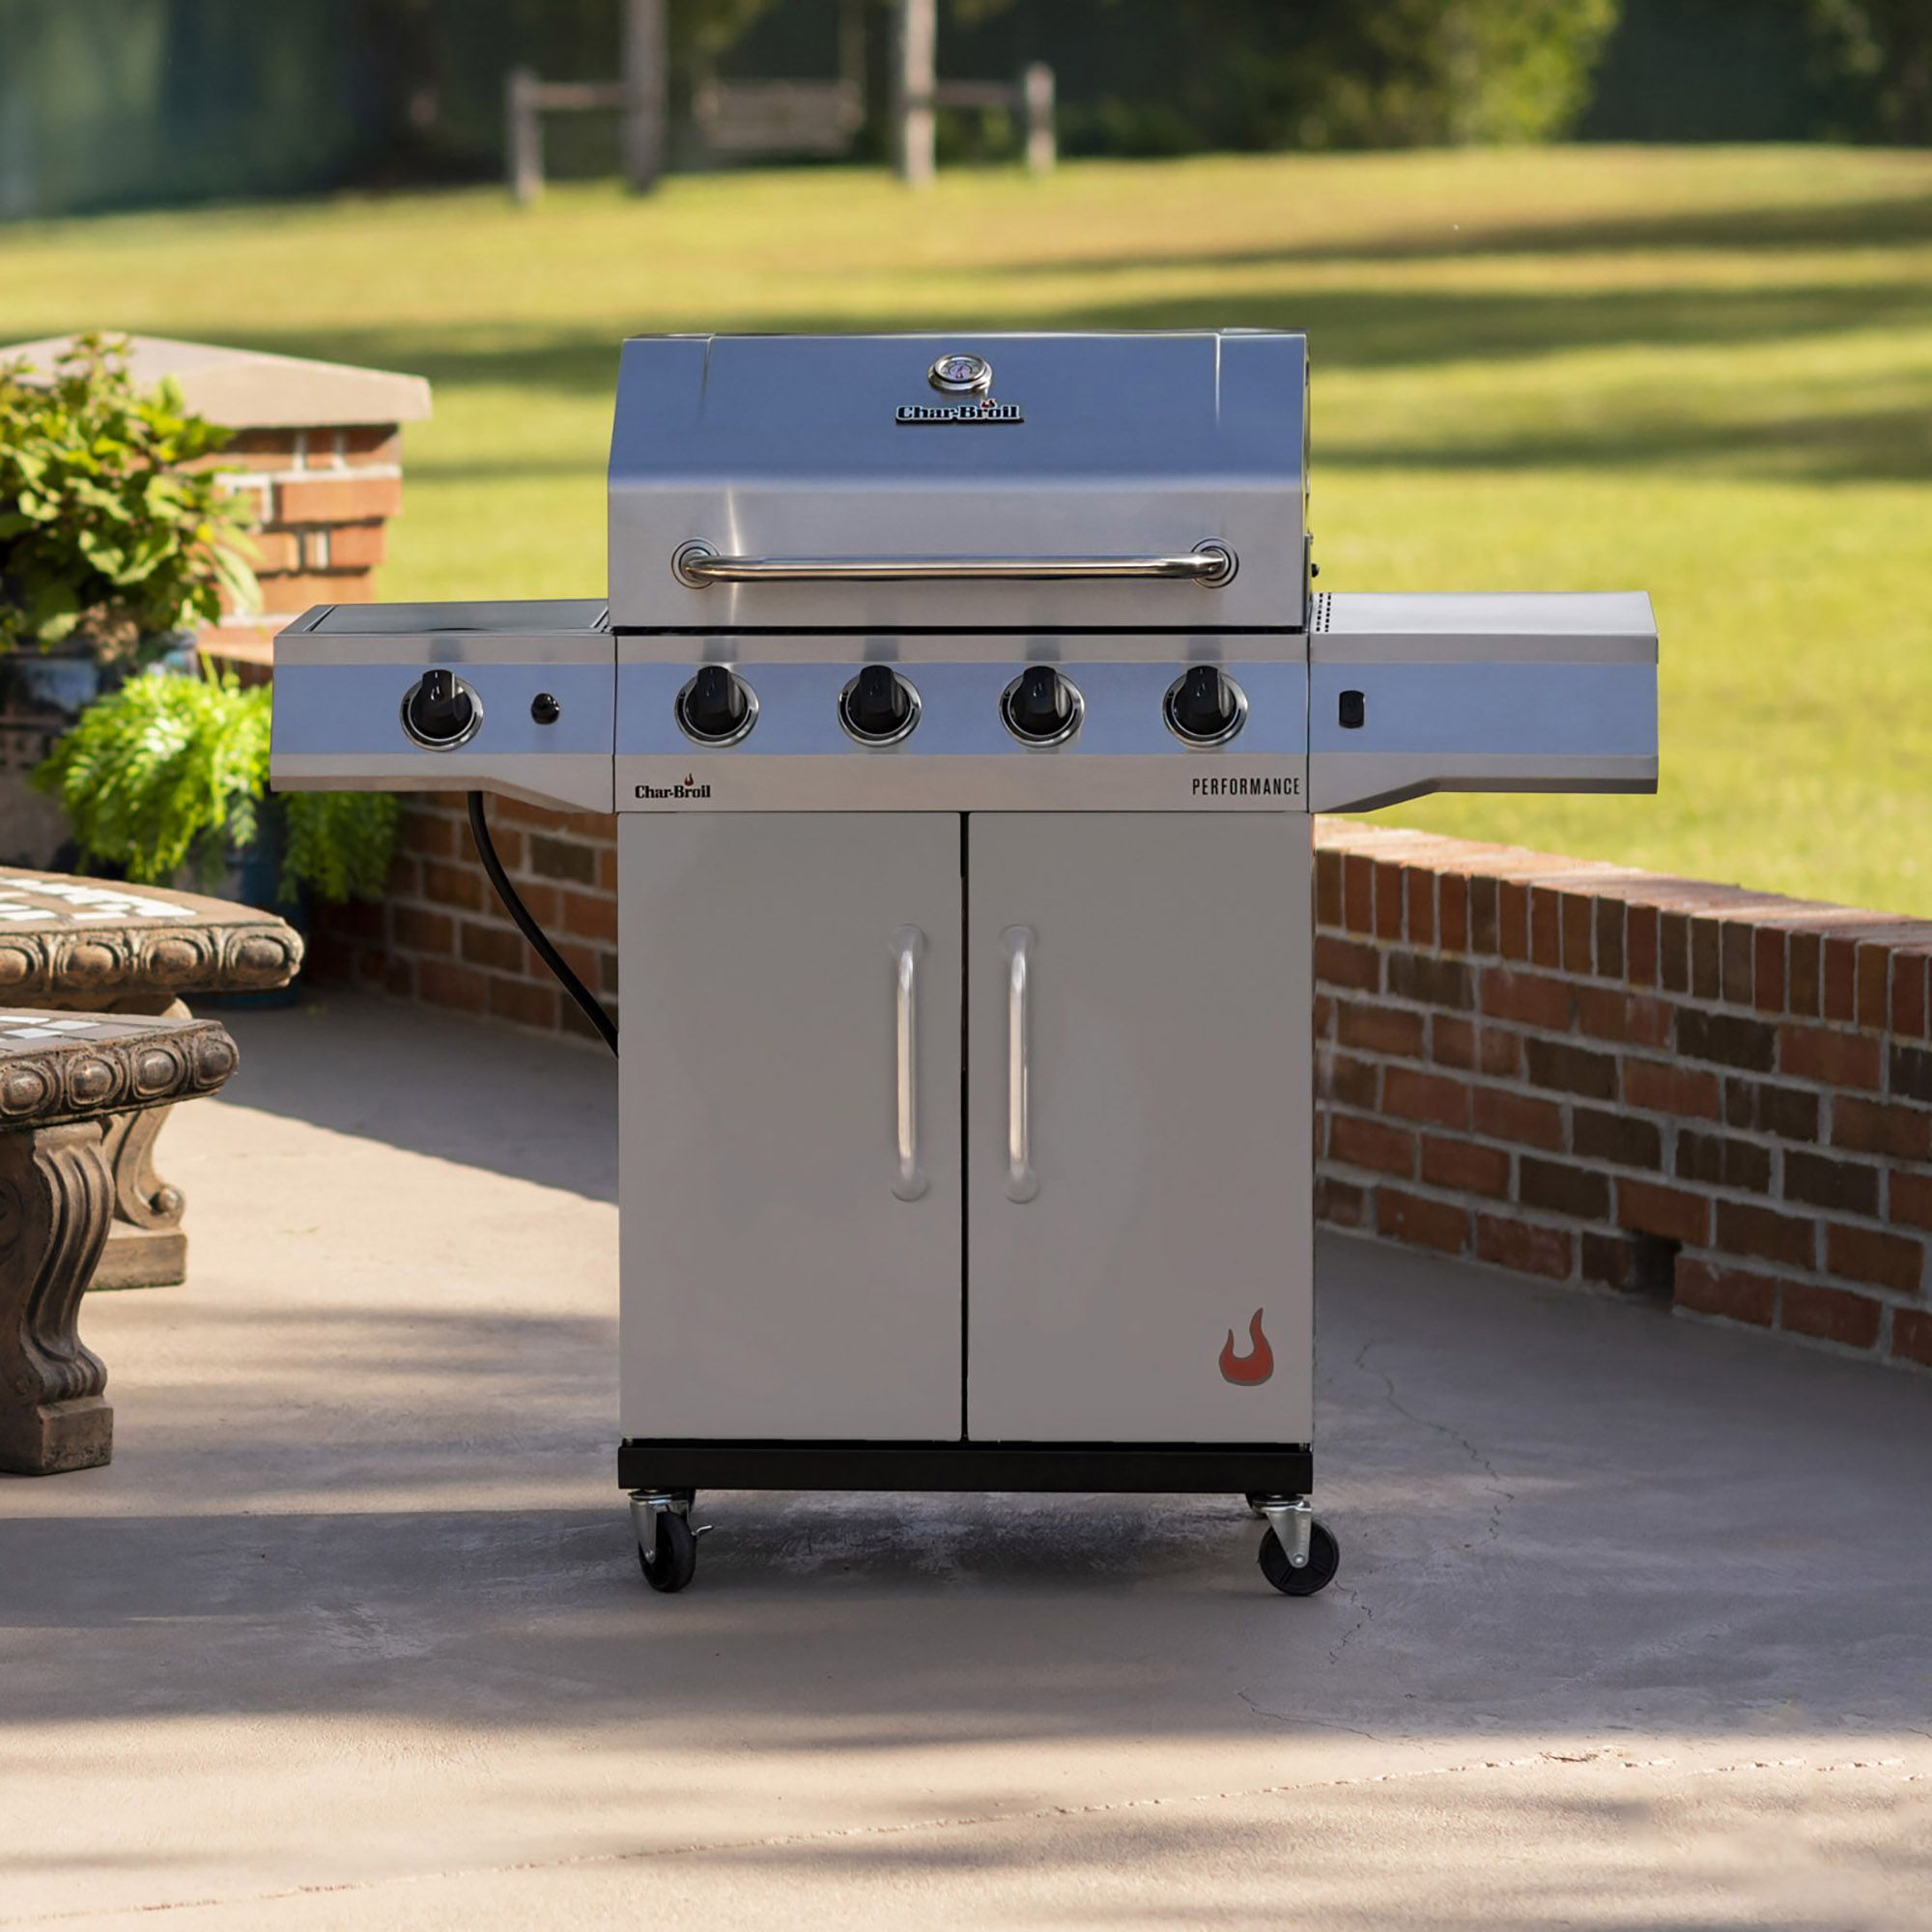 Char-Broil Performance Series 4-Burner Gas Grill with Soft Cover - $299.99